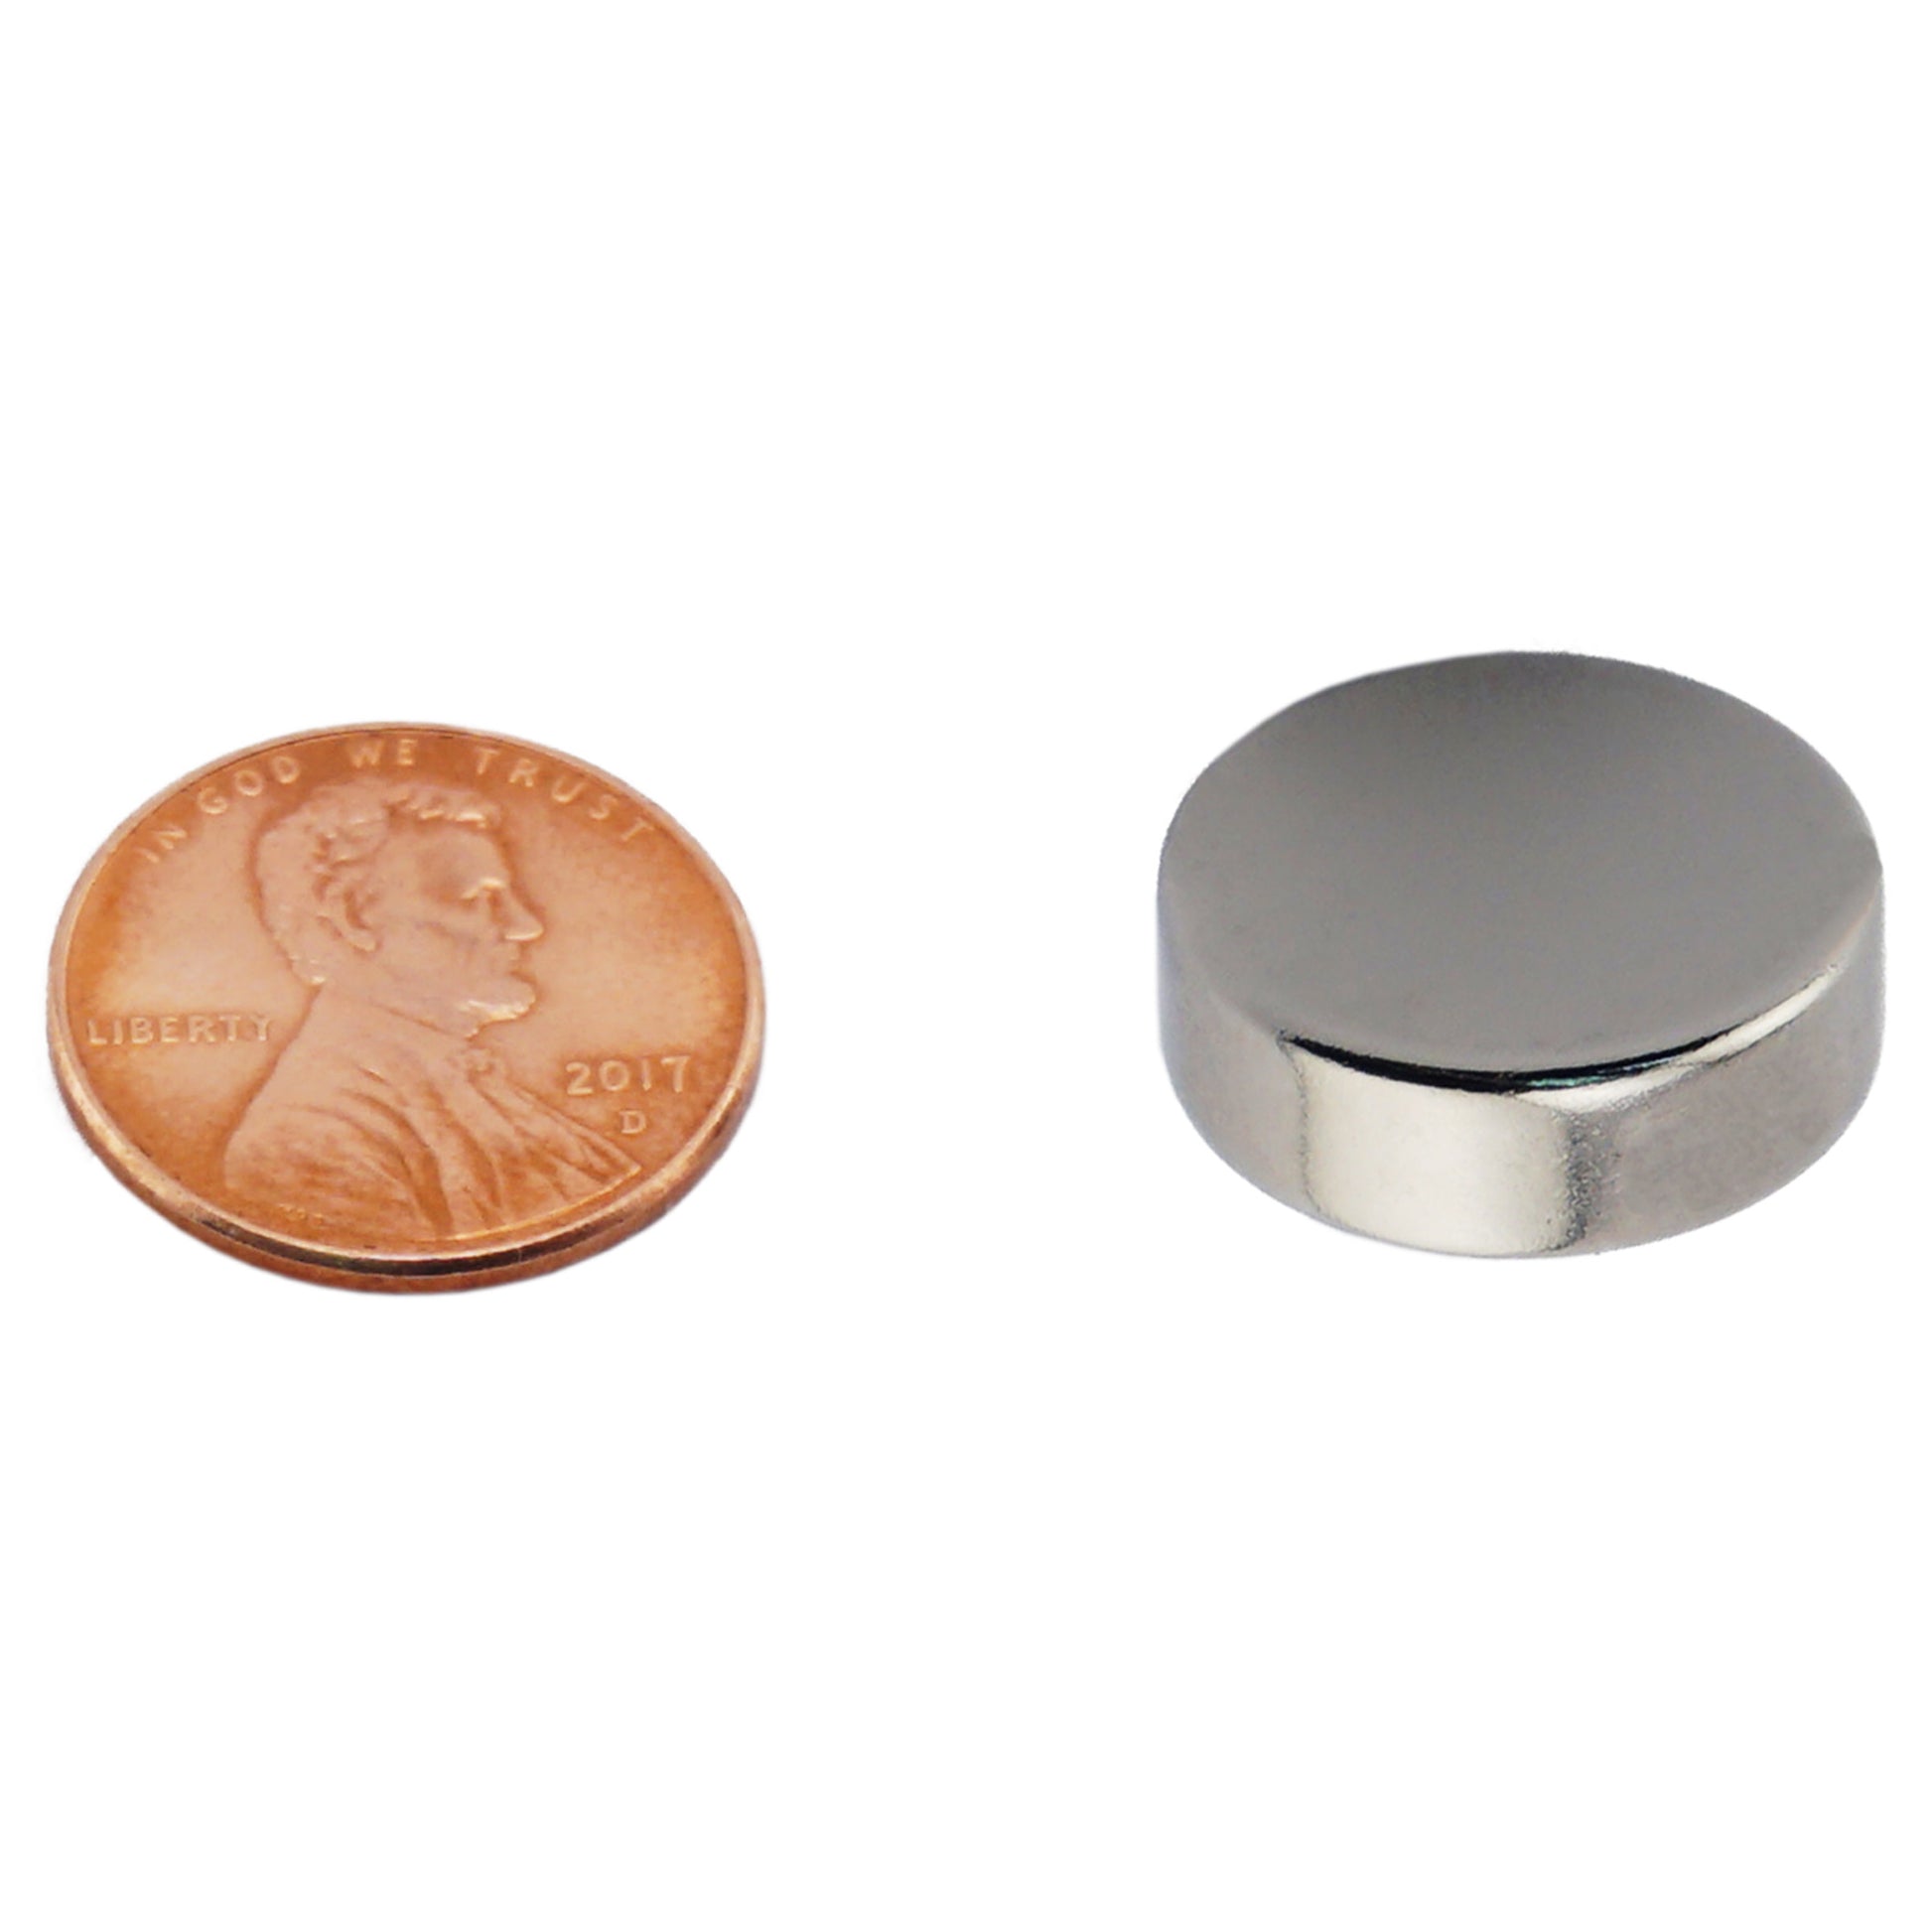 Load image into Gallery viewer, ND007531N Neodymium Disc Magnet - Compared to Penny for Size Reference